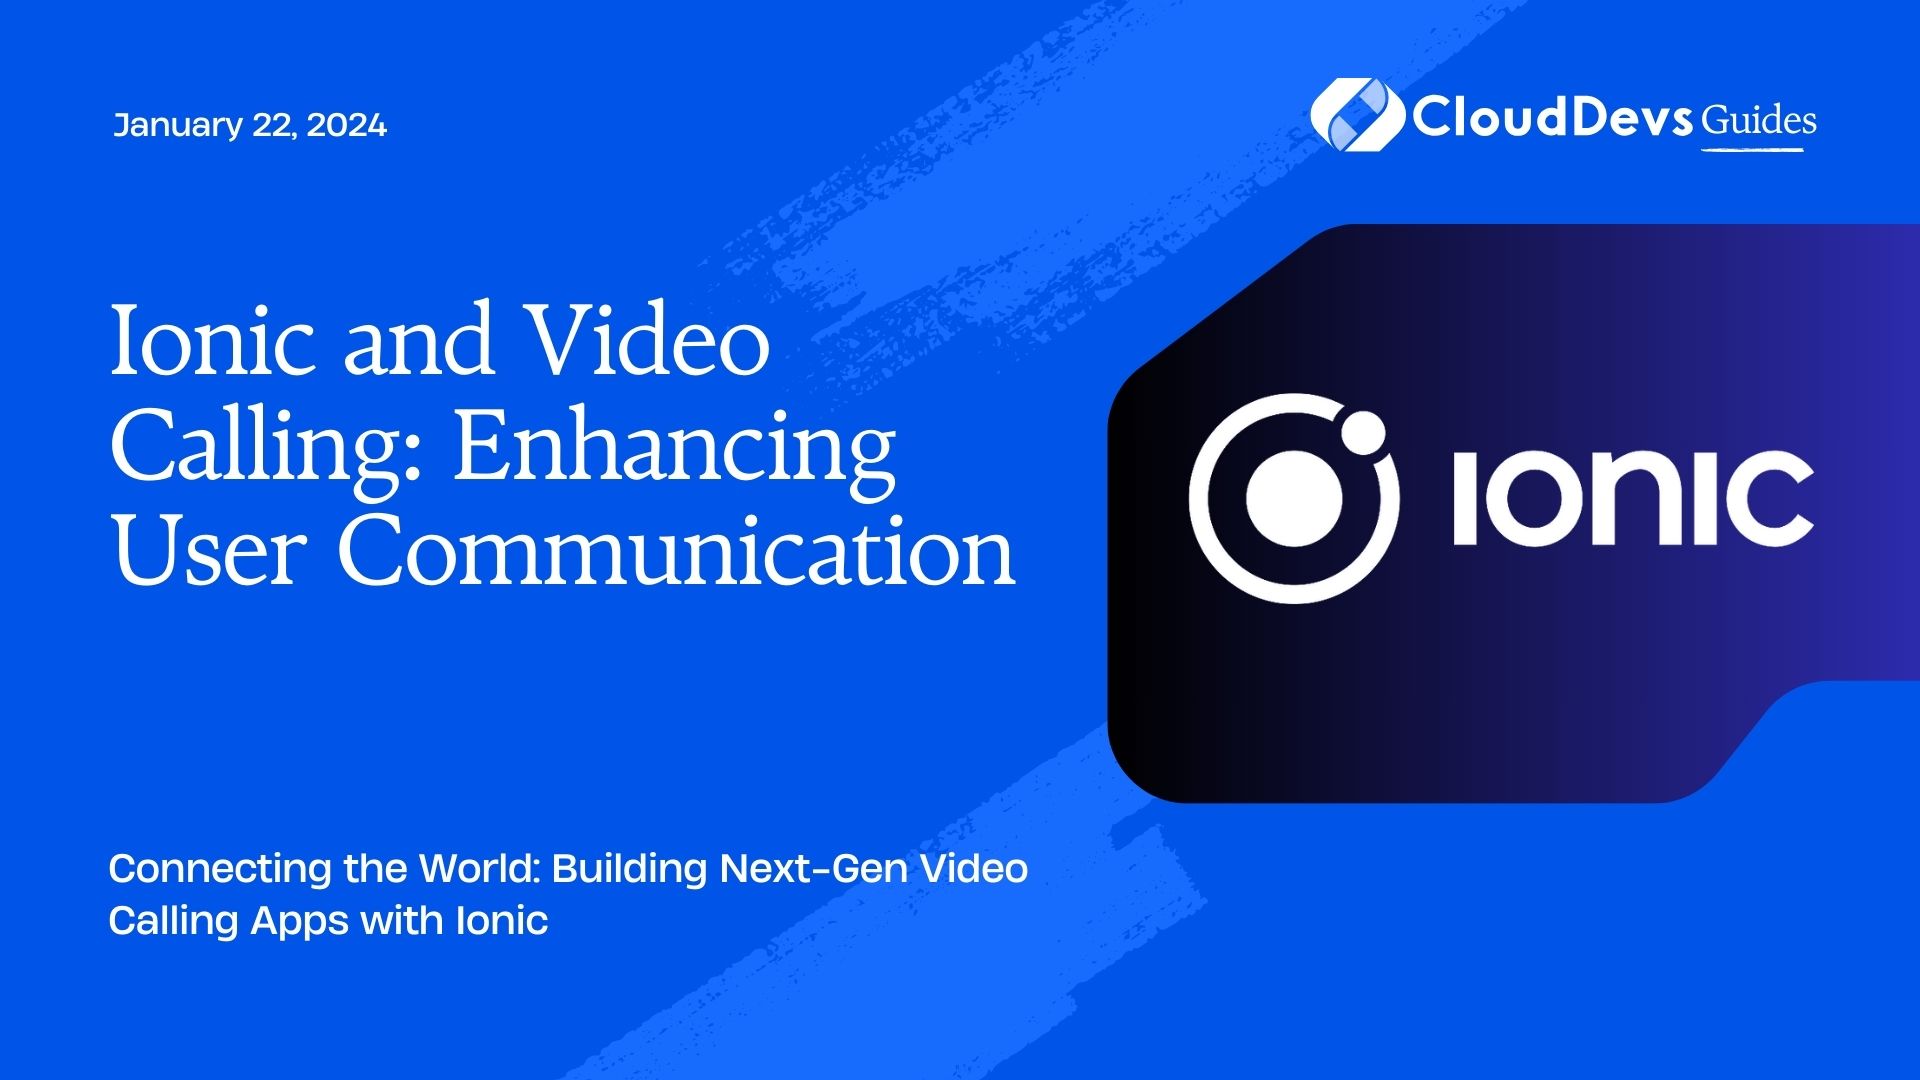 Ionic and Video Calling: Enhancing User Communication